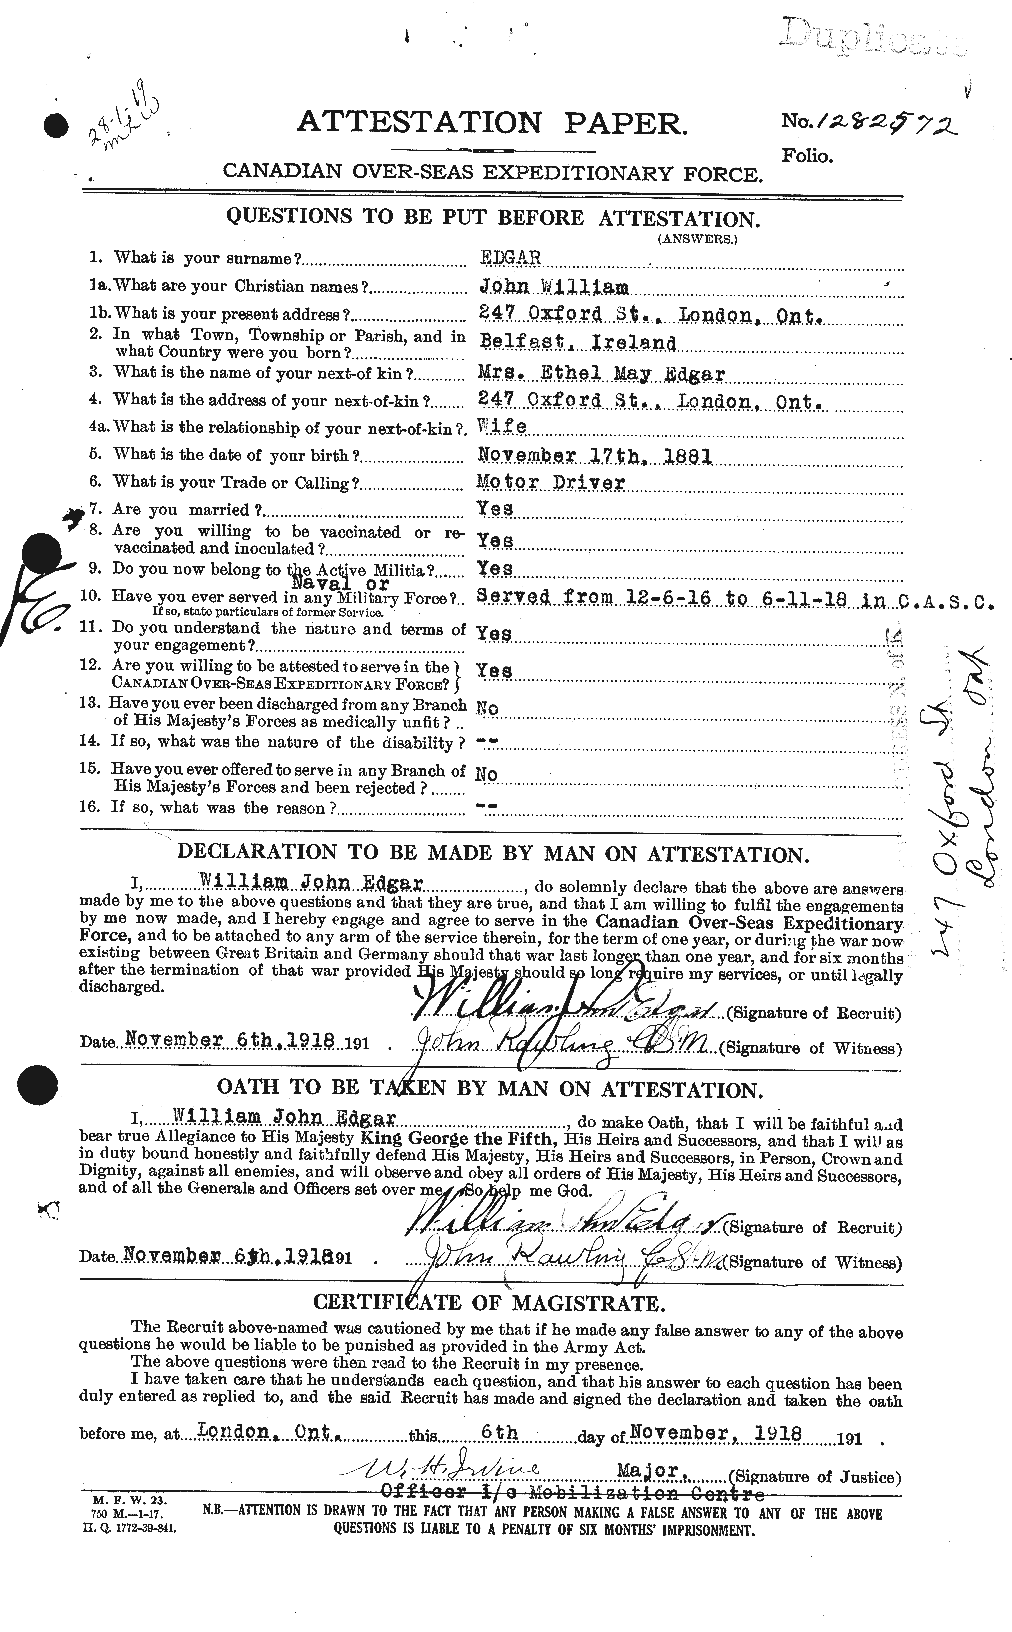 Personnel Records of the First World War - CEF 308156a